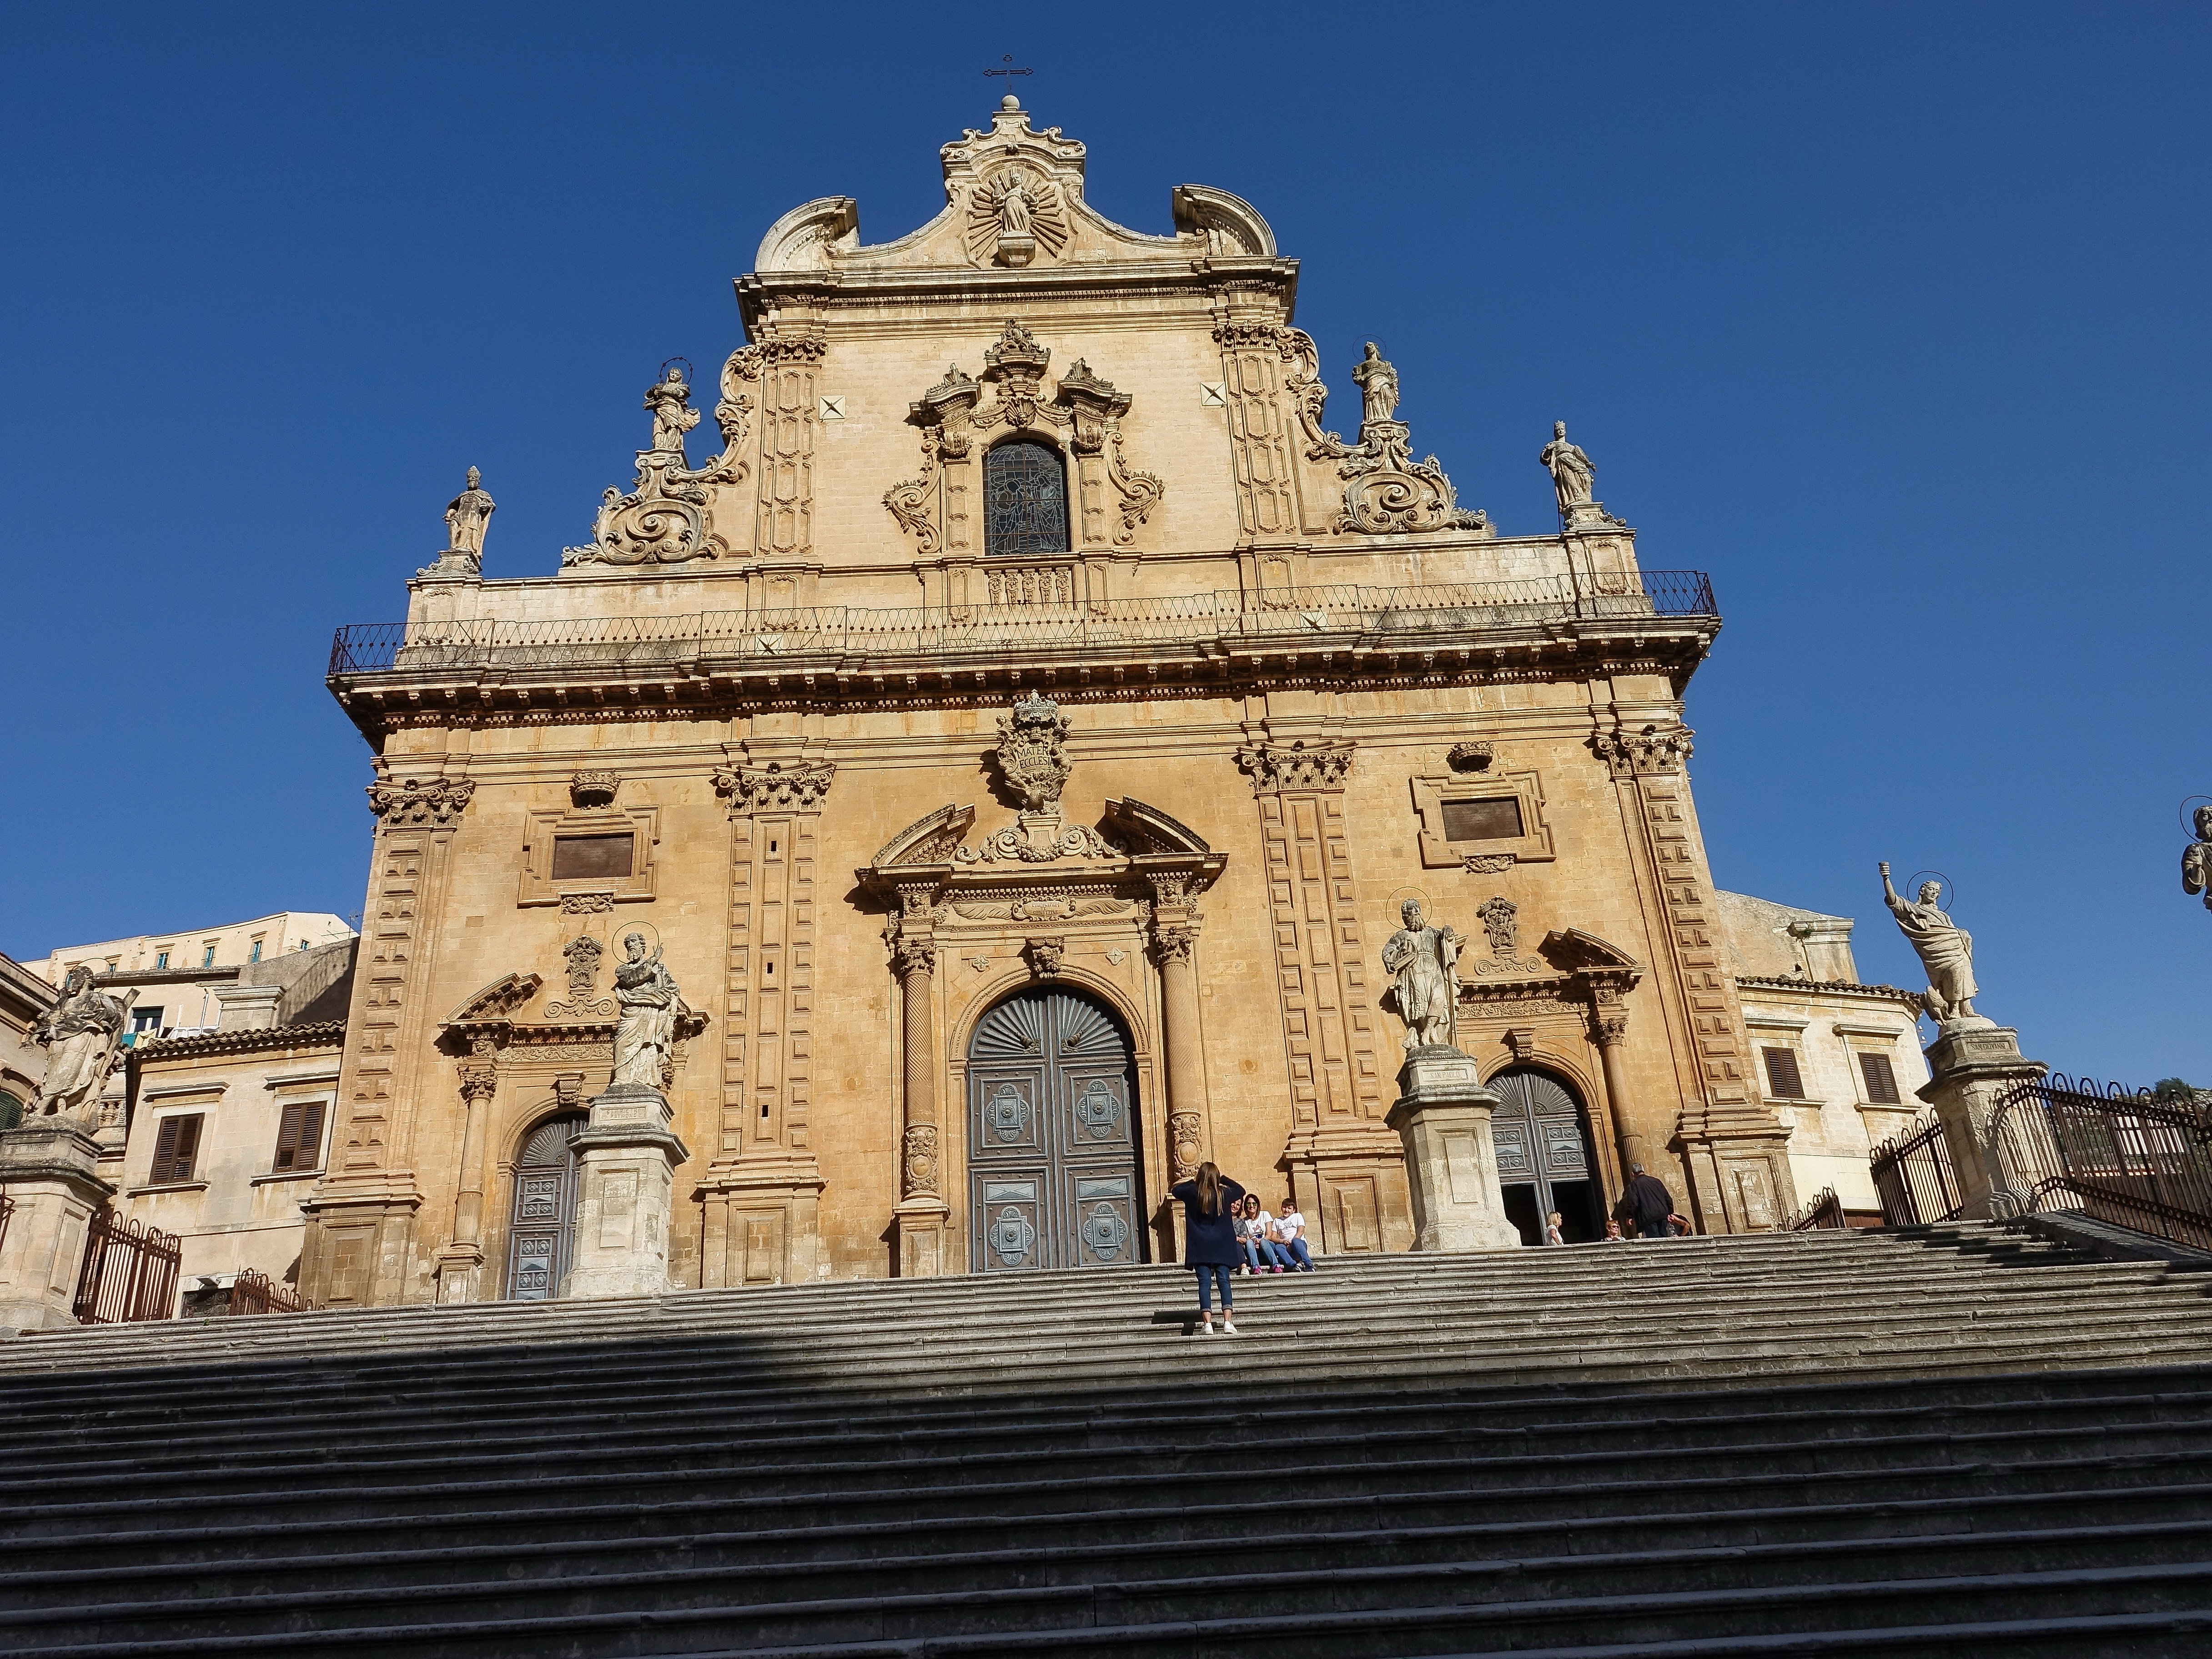 From Majestic cathedral of Modica on hilltop